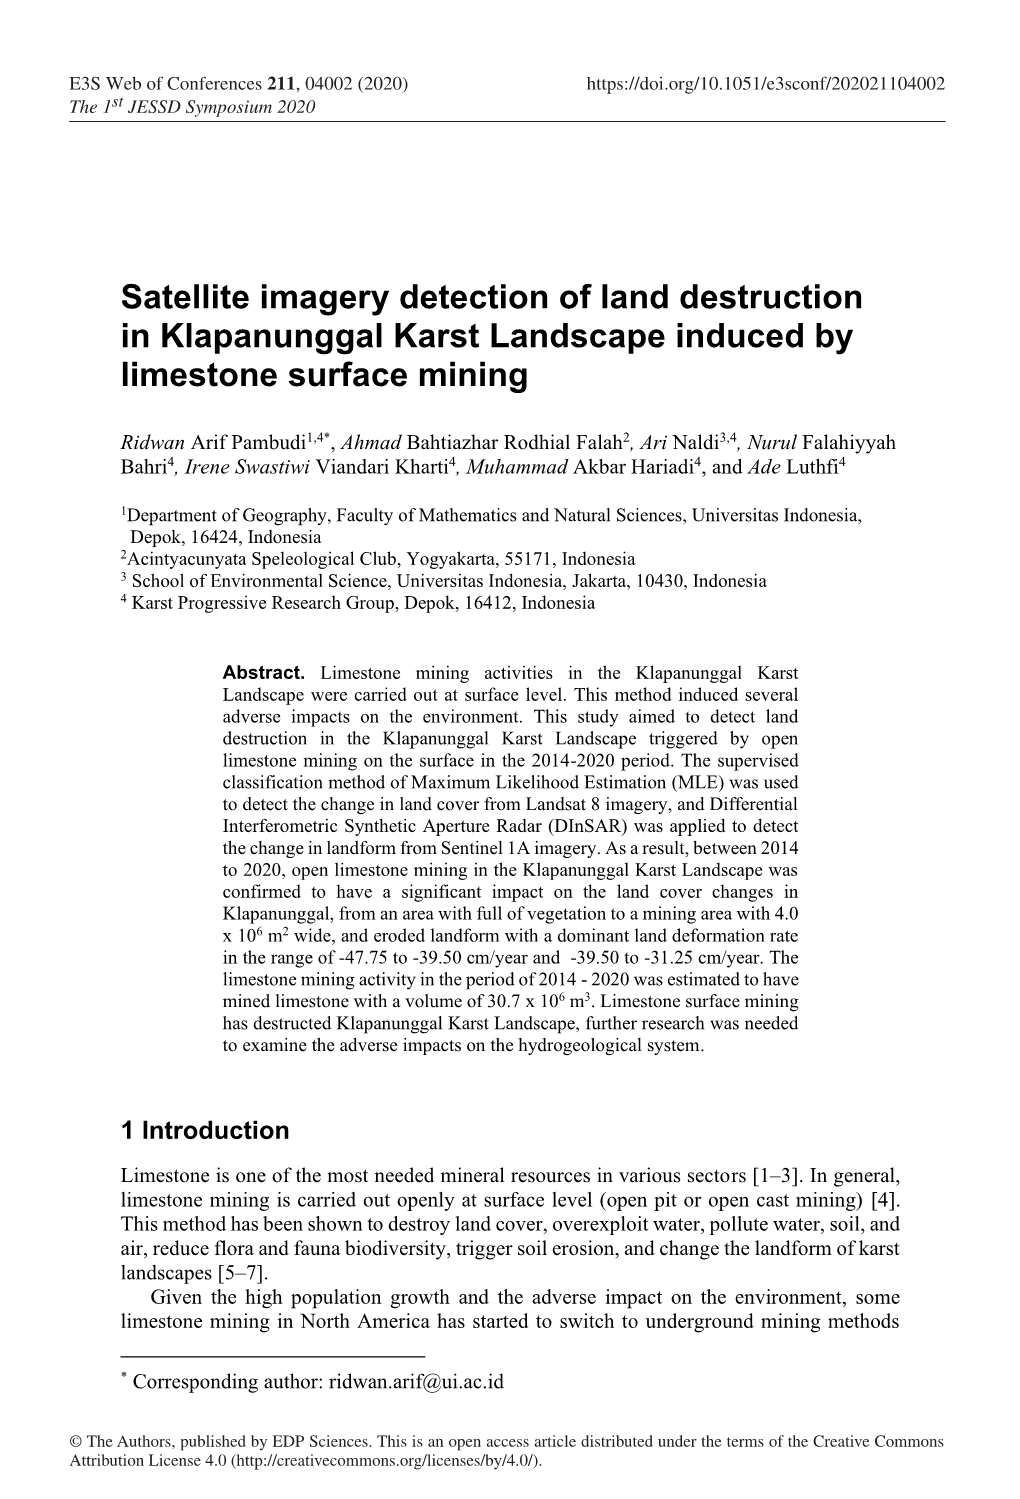 Satellite Imagery Detection of Land Destruction in Klapanunggal Karst Landscape Induced by Limestone Surface Mining